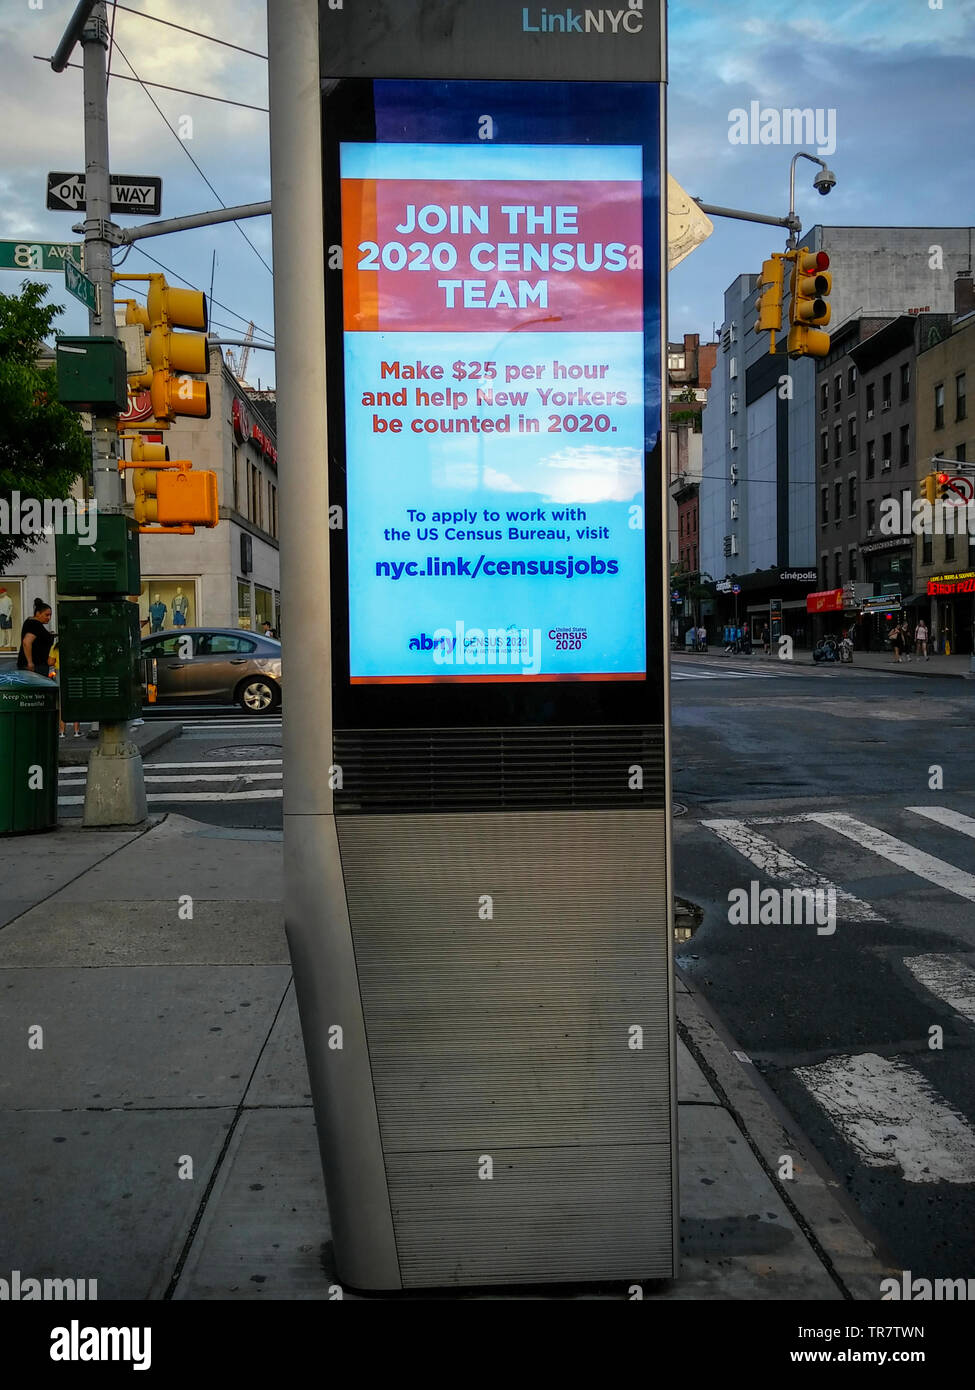 Advertising on a LinkNYC kiosk in New York promotes census jobs, seen on Sunday, May 26, 2019. The census is a count of everyone living in the United States, citizens and non-citizens. By law it is conducted every 10 years and the information is used to reapportion congressional districts as well as affecting the distribution of government funds.  (© Richard B. Levine) Stock Photo